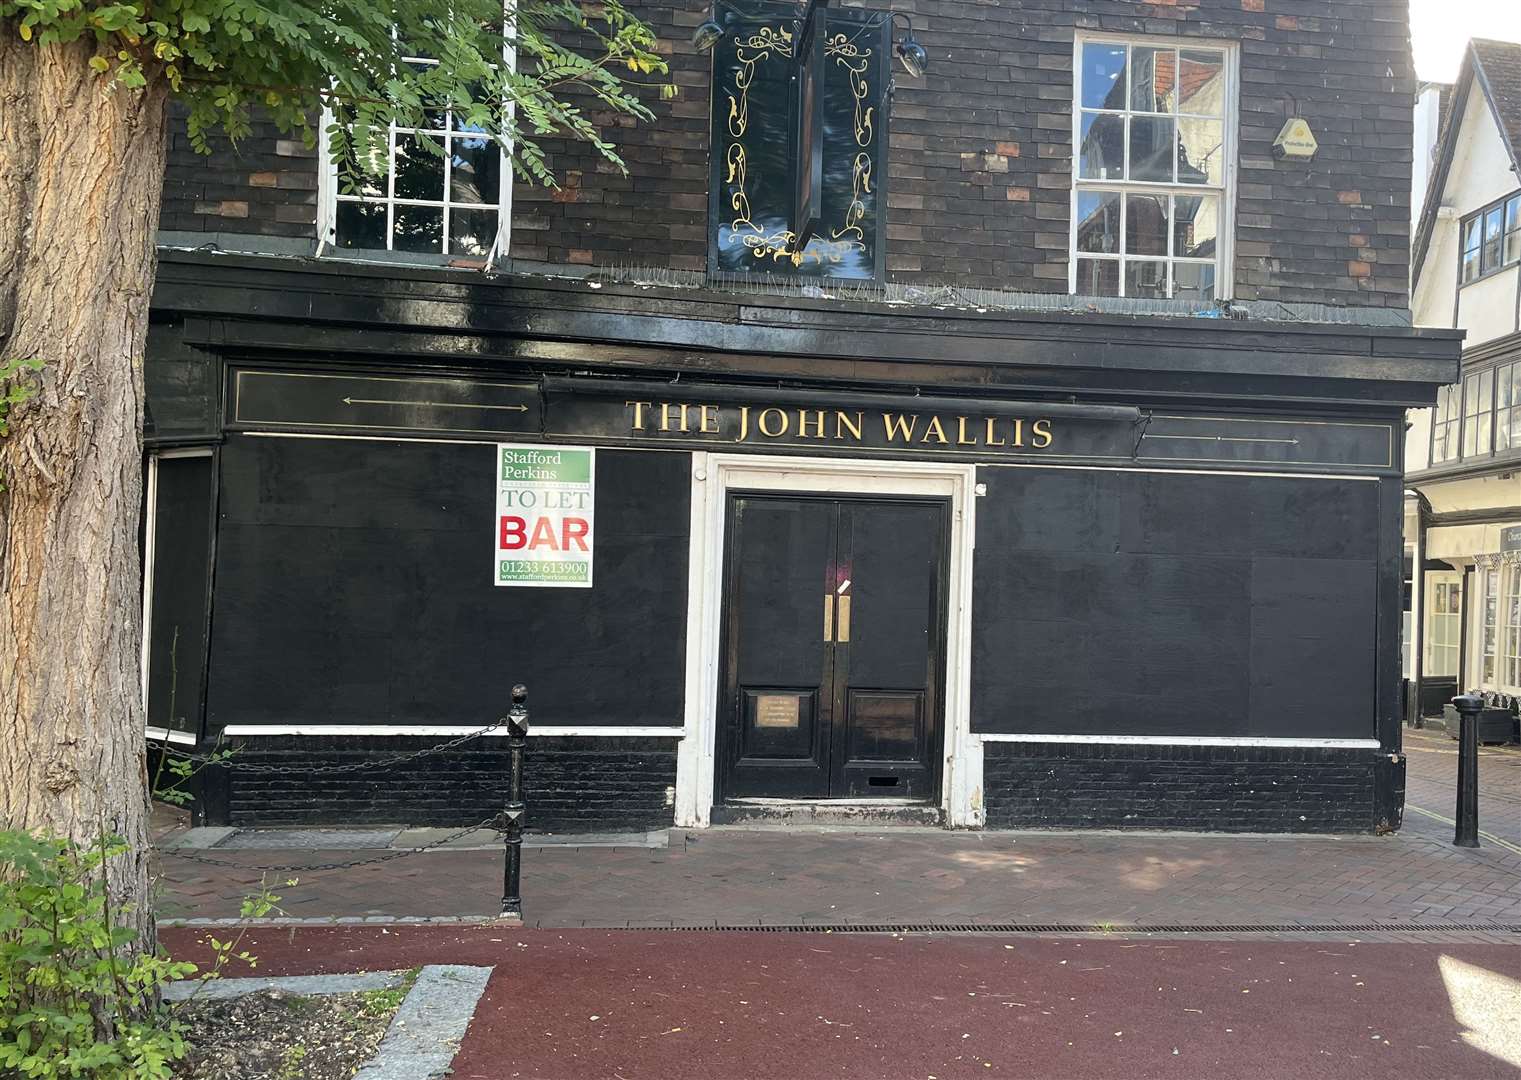 The John Wallis pub has been boarded up since 2020